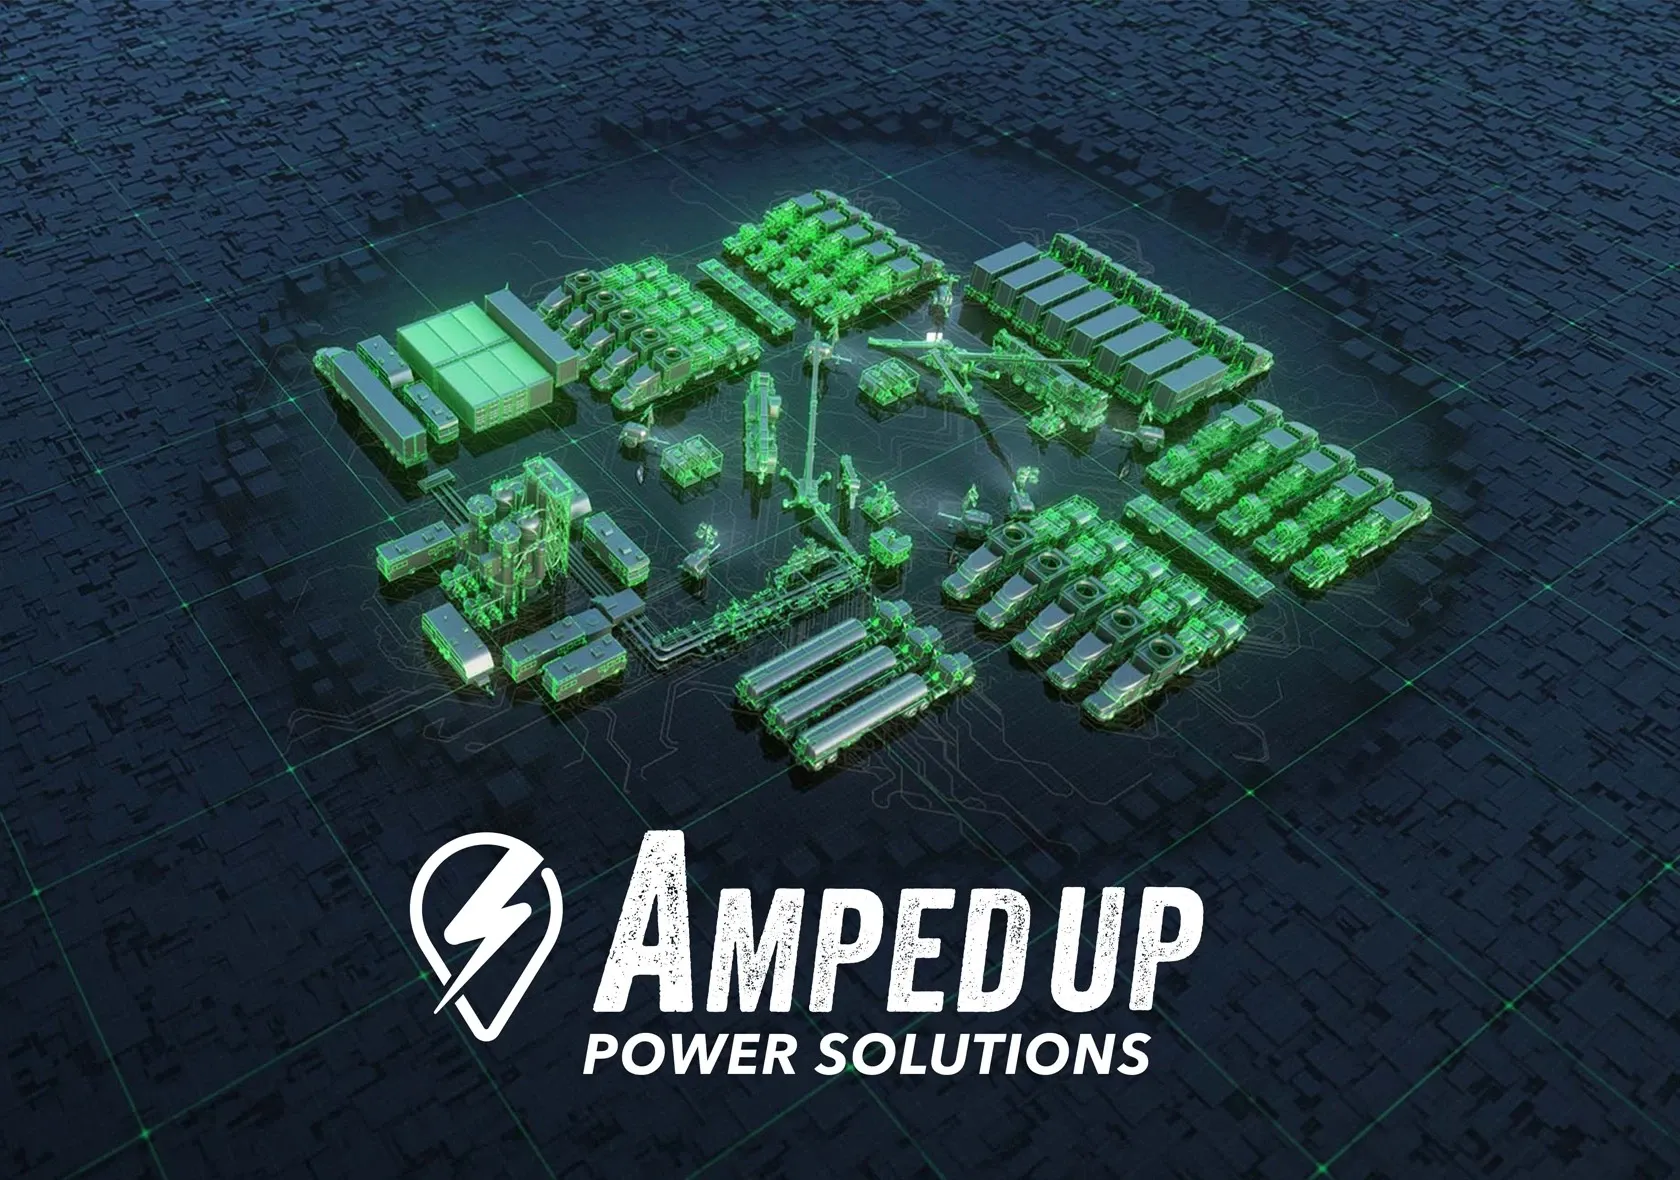 Amped Up: Company website interactive experience.